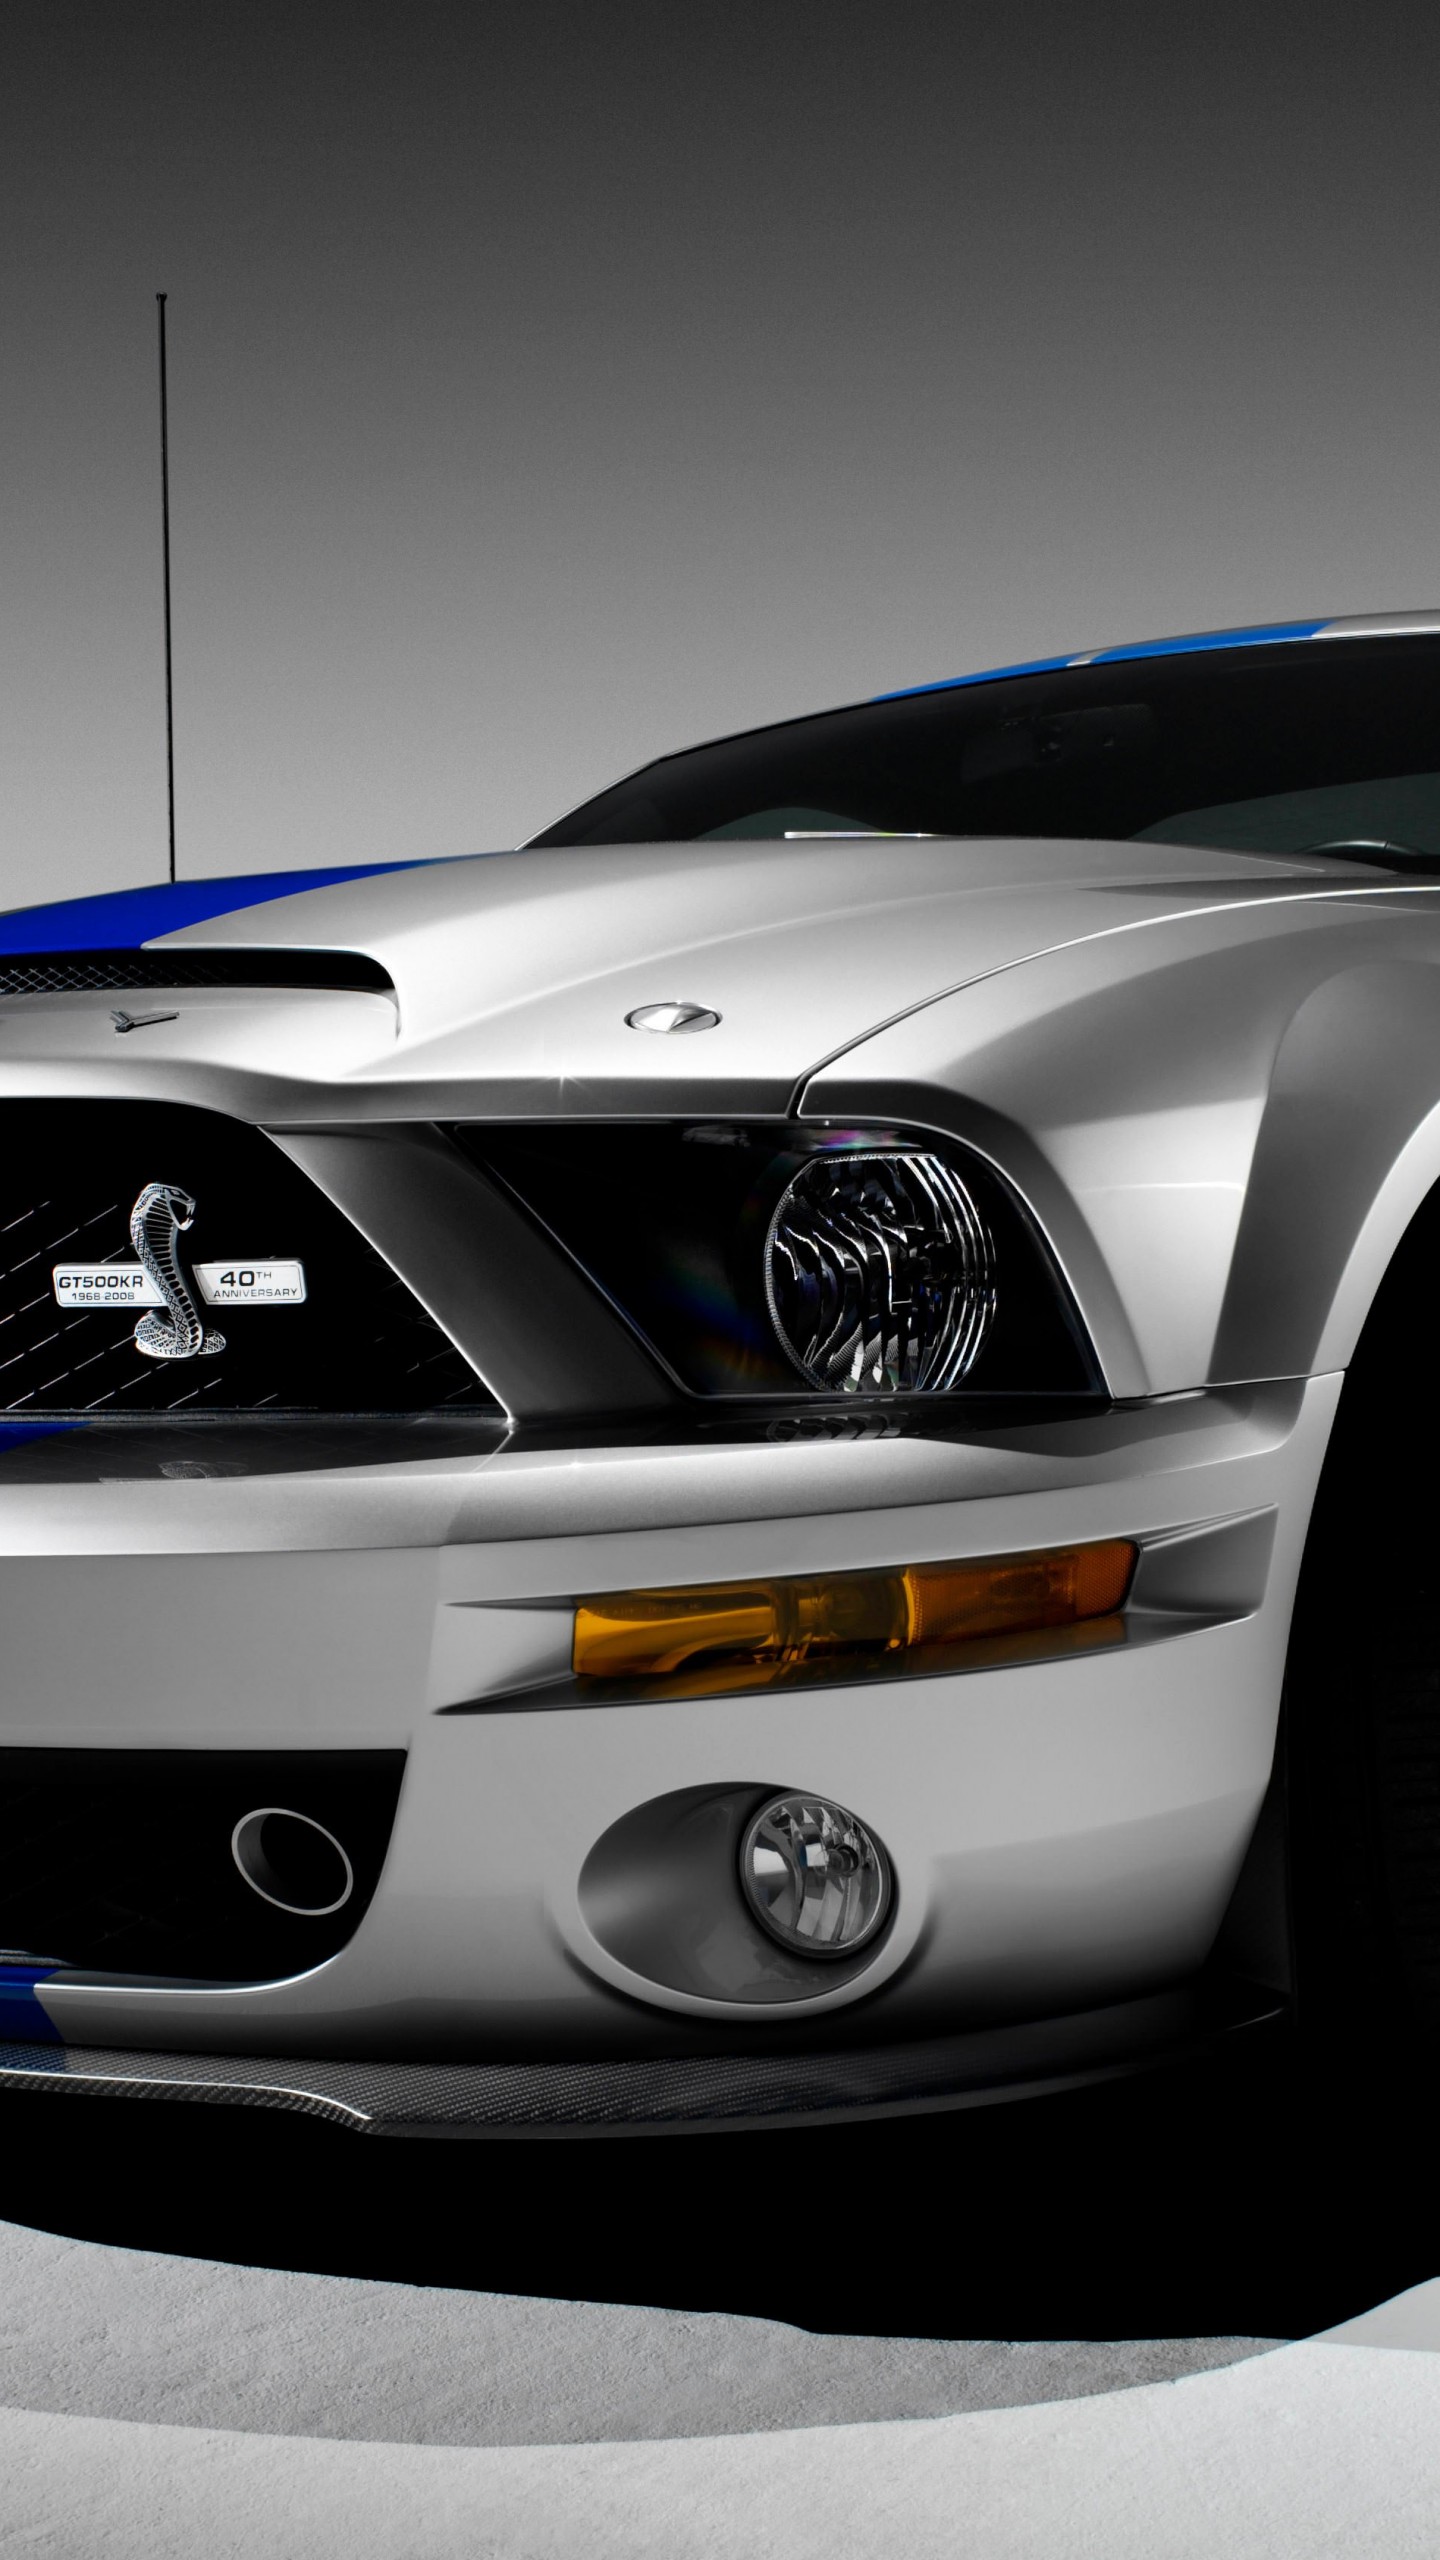 Shelby Mustang GT500KR Wallpaper for SAMSUNG Galaxy Note 4